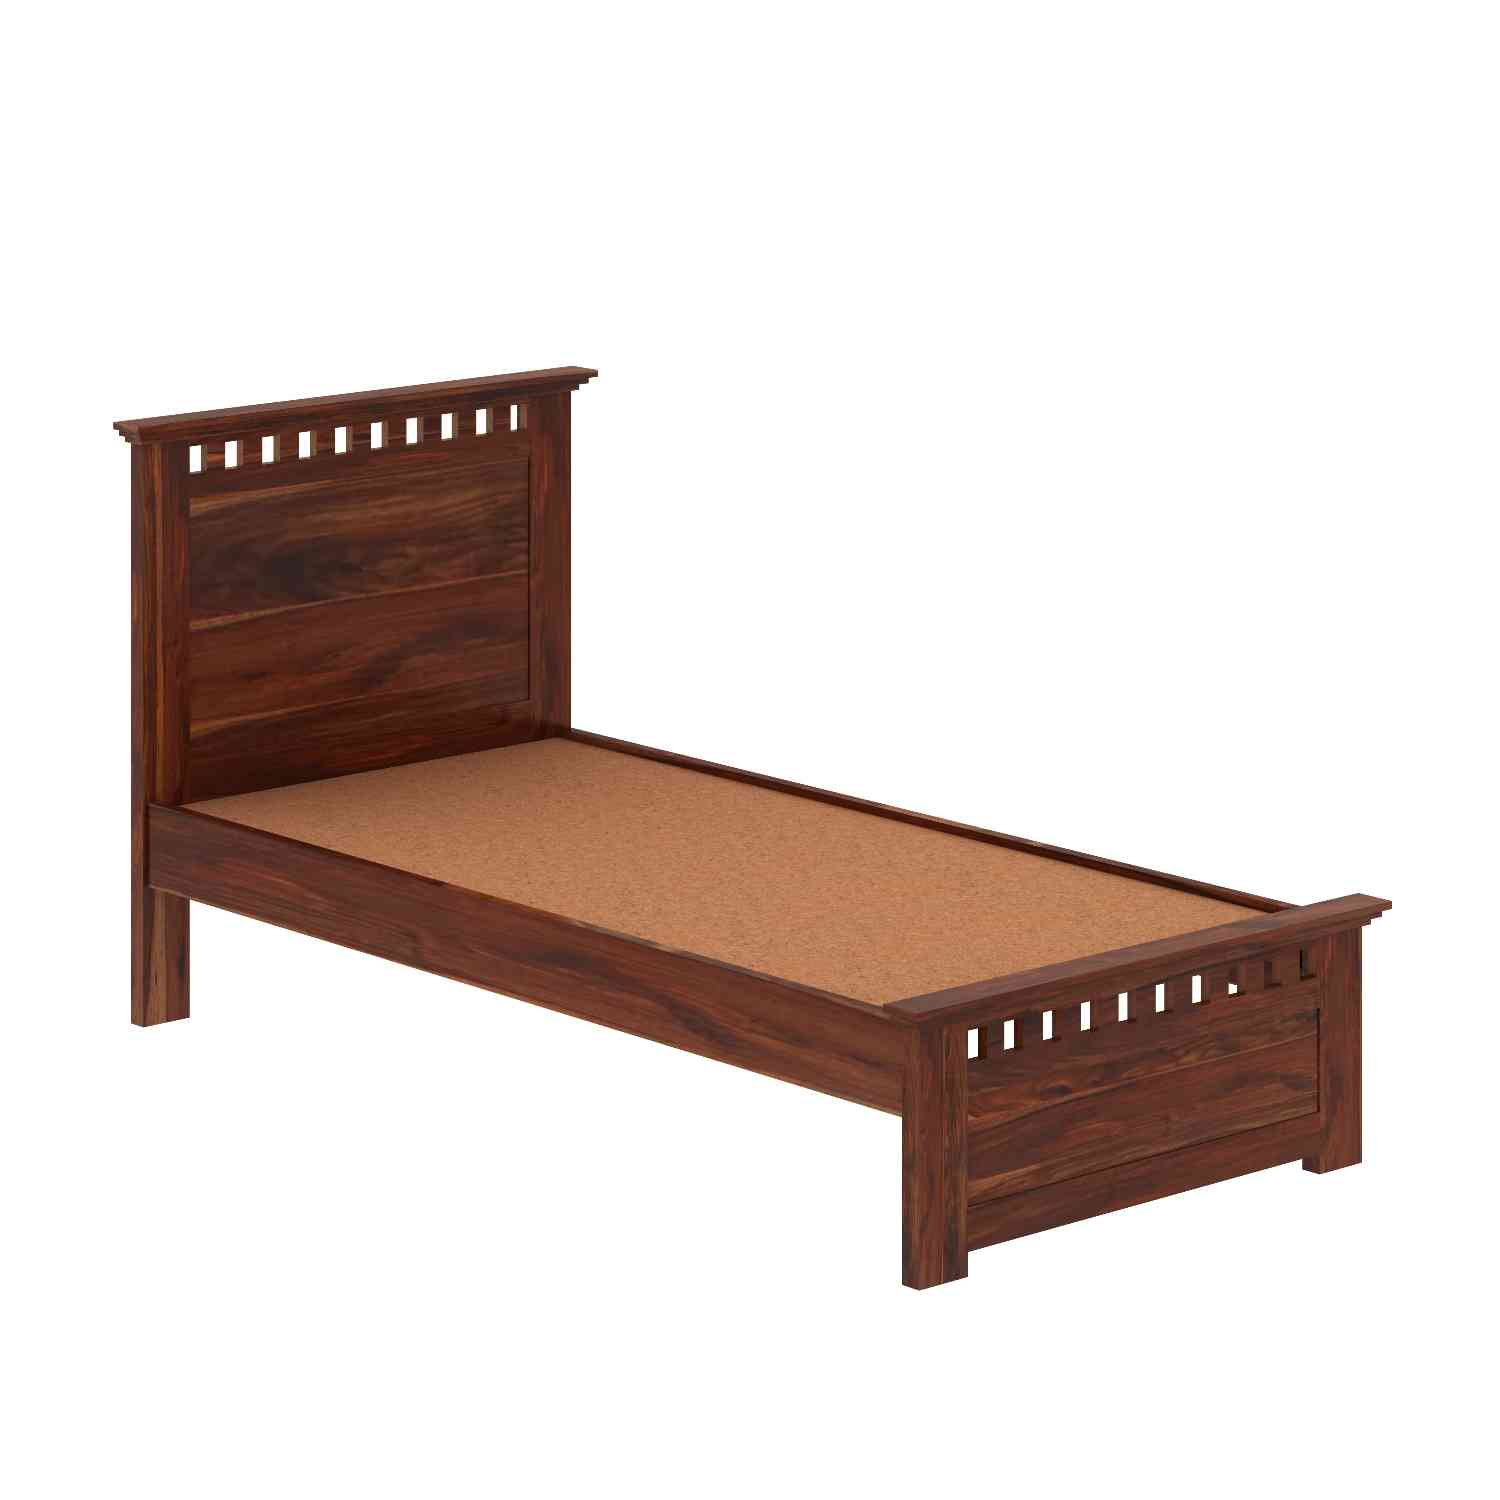 Amer Solid Sheesham Wood Single Bed Without Storage (Natural Finish)